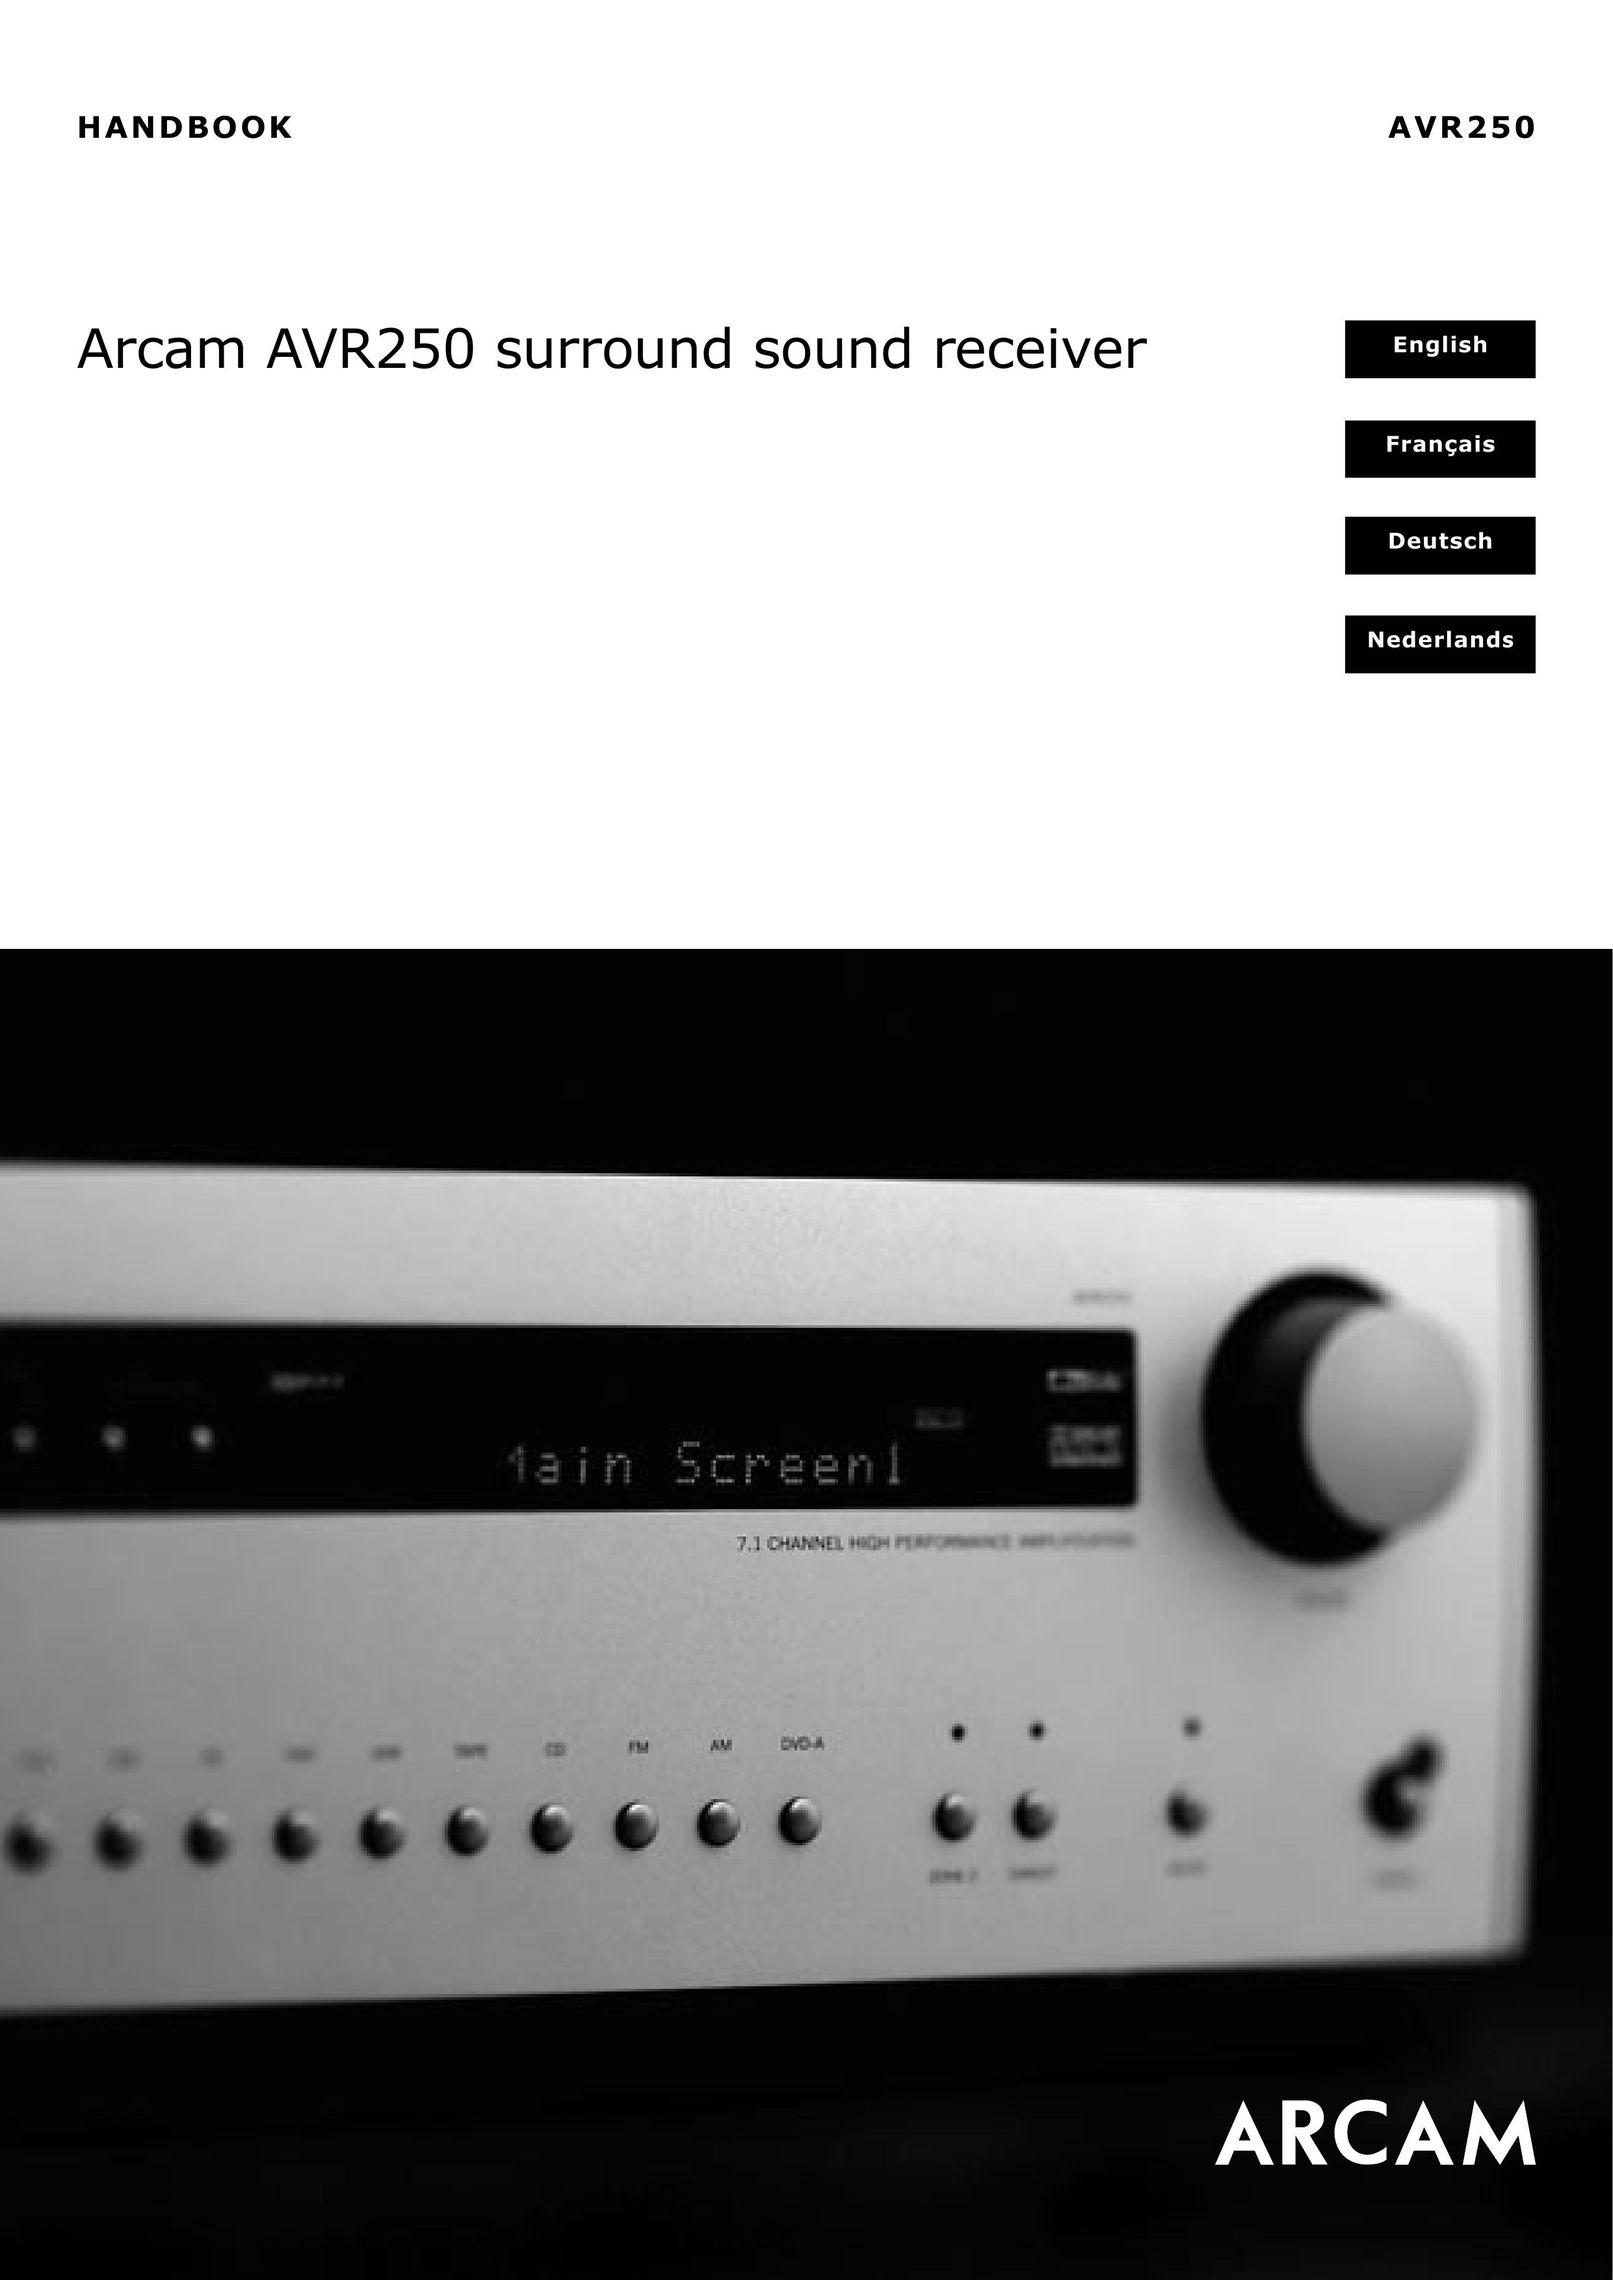 Arcam AVR250 Home Theater System User Manual